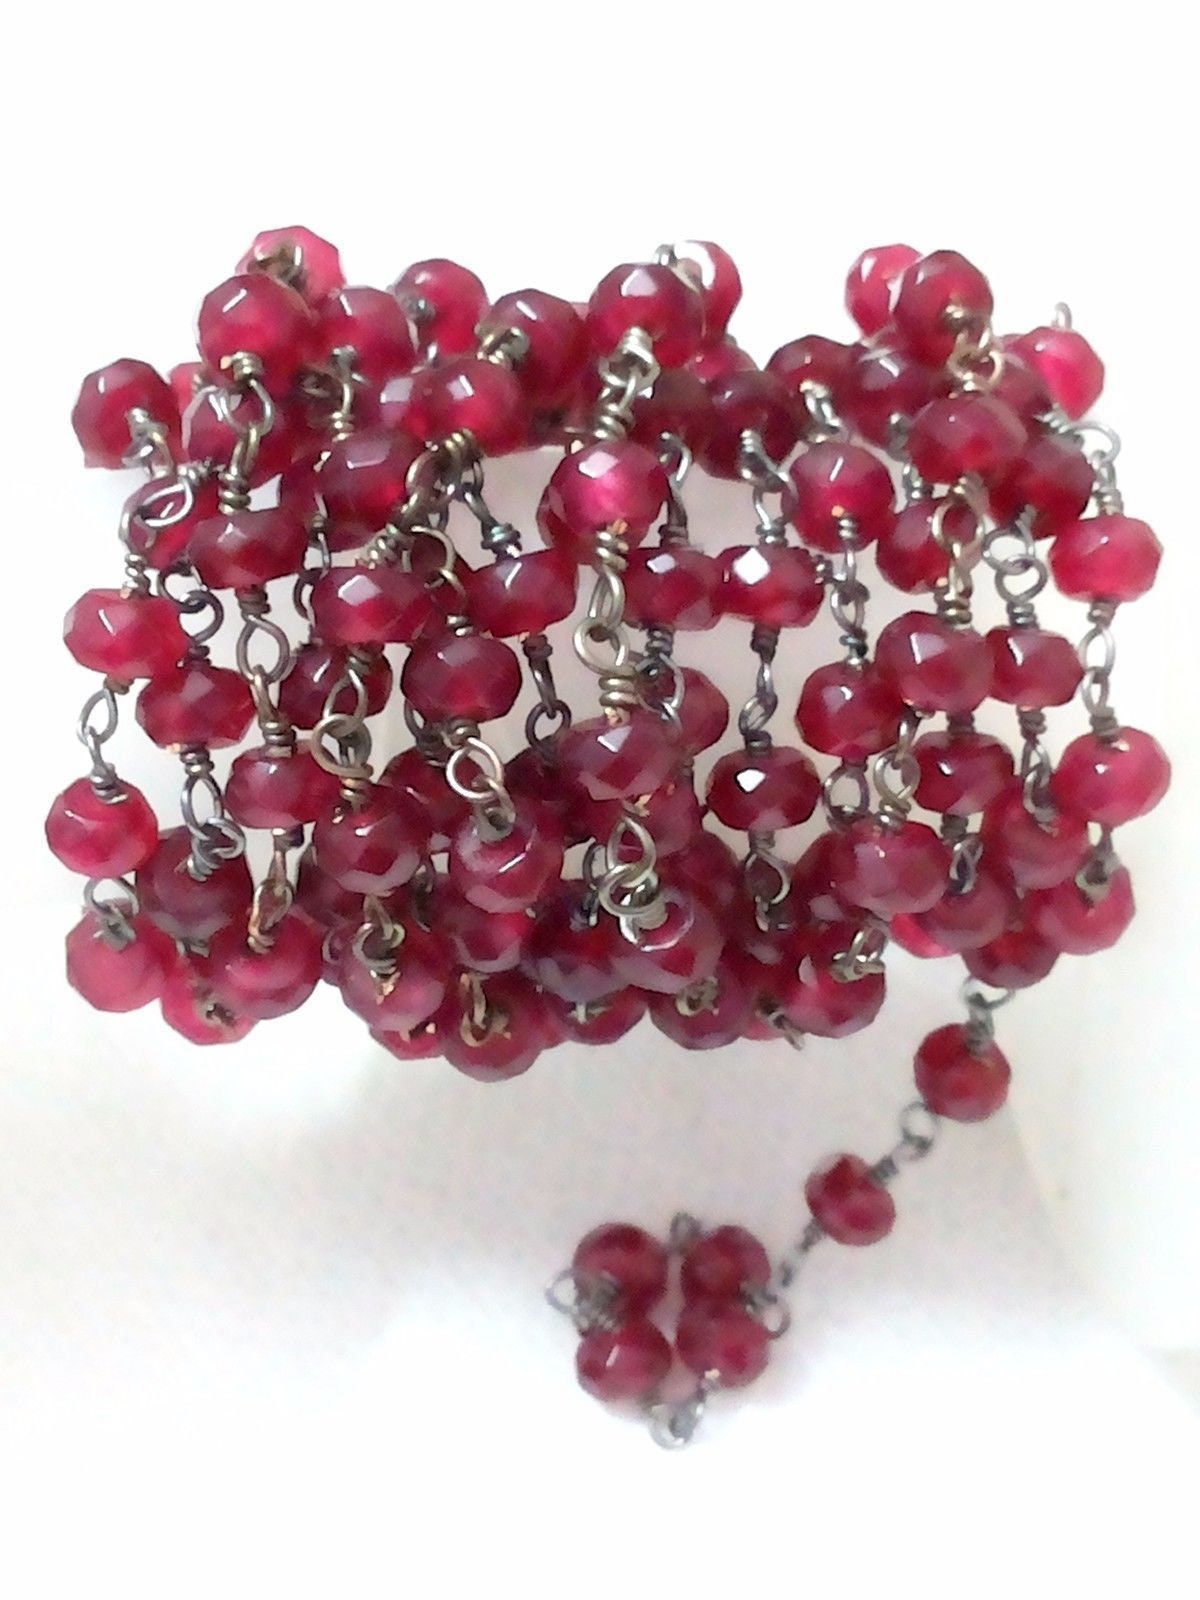 Red Crystal Rondelle Beads 8mm X 6.2mm Faceted Transparent Prayer Beads  60pcs for Five Decade Rosary 